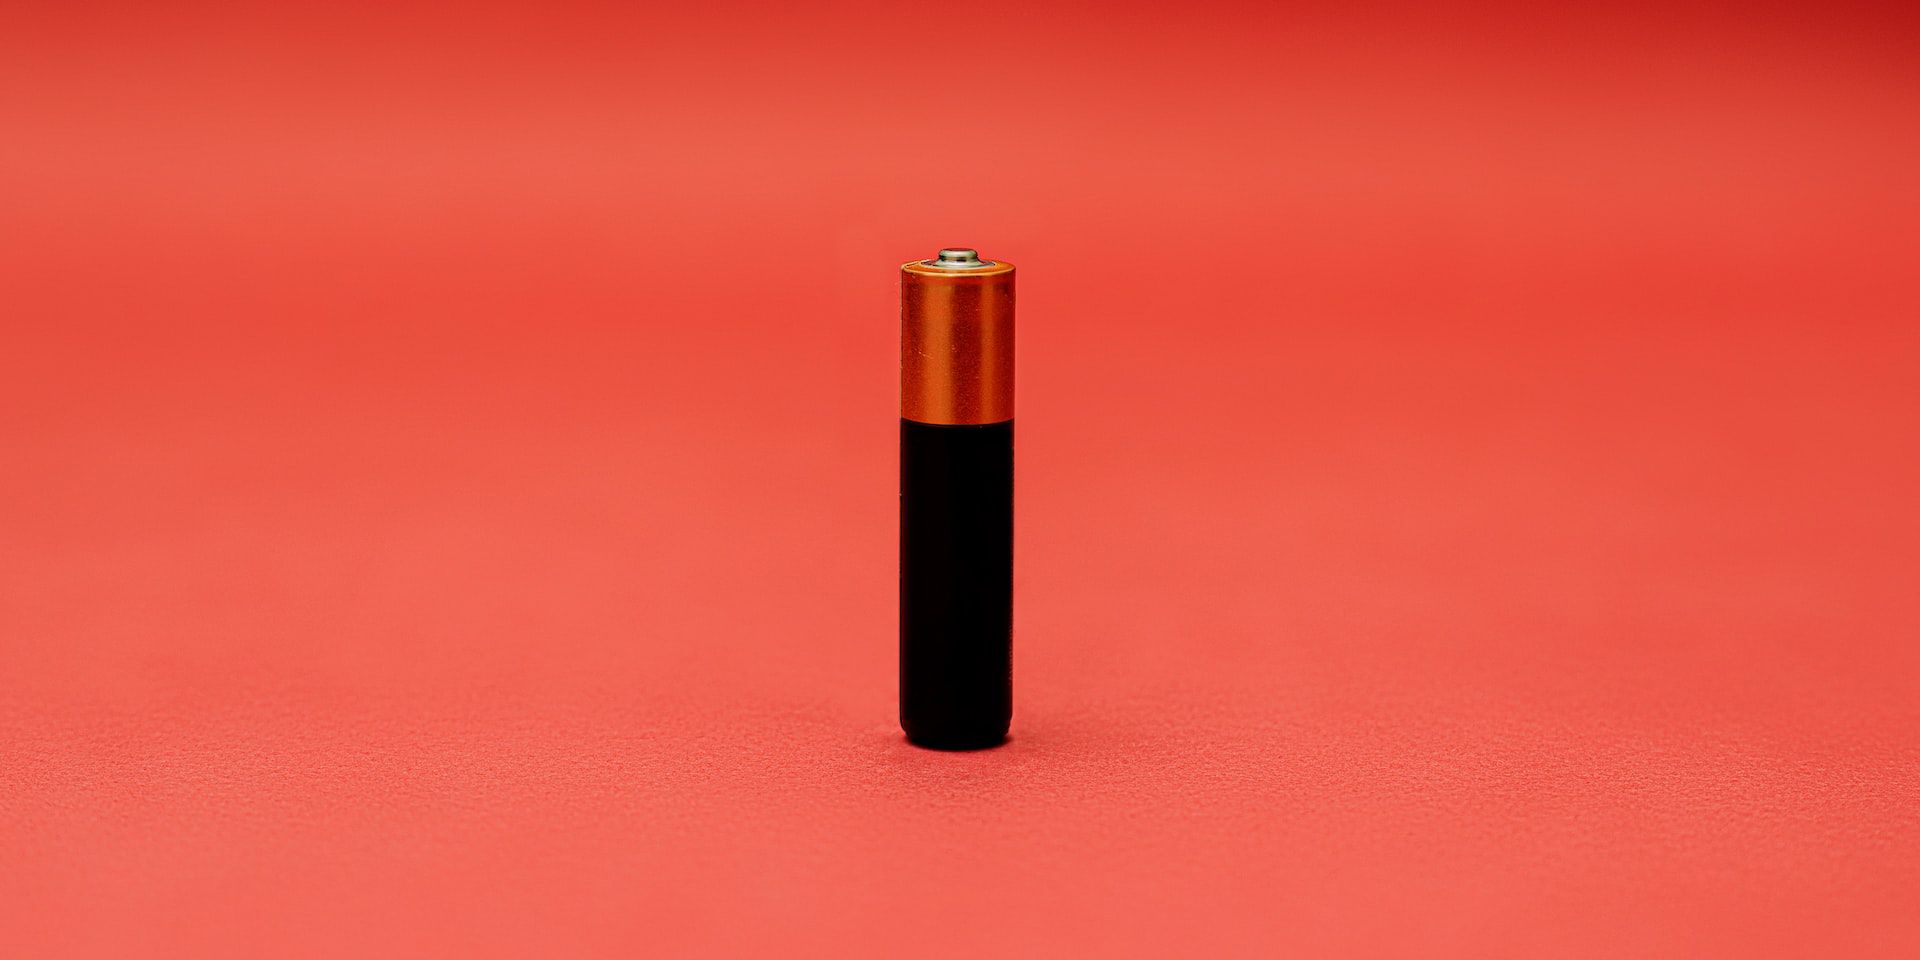 AA battery on red background